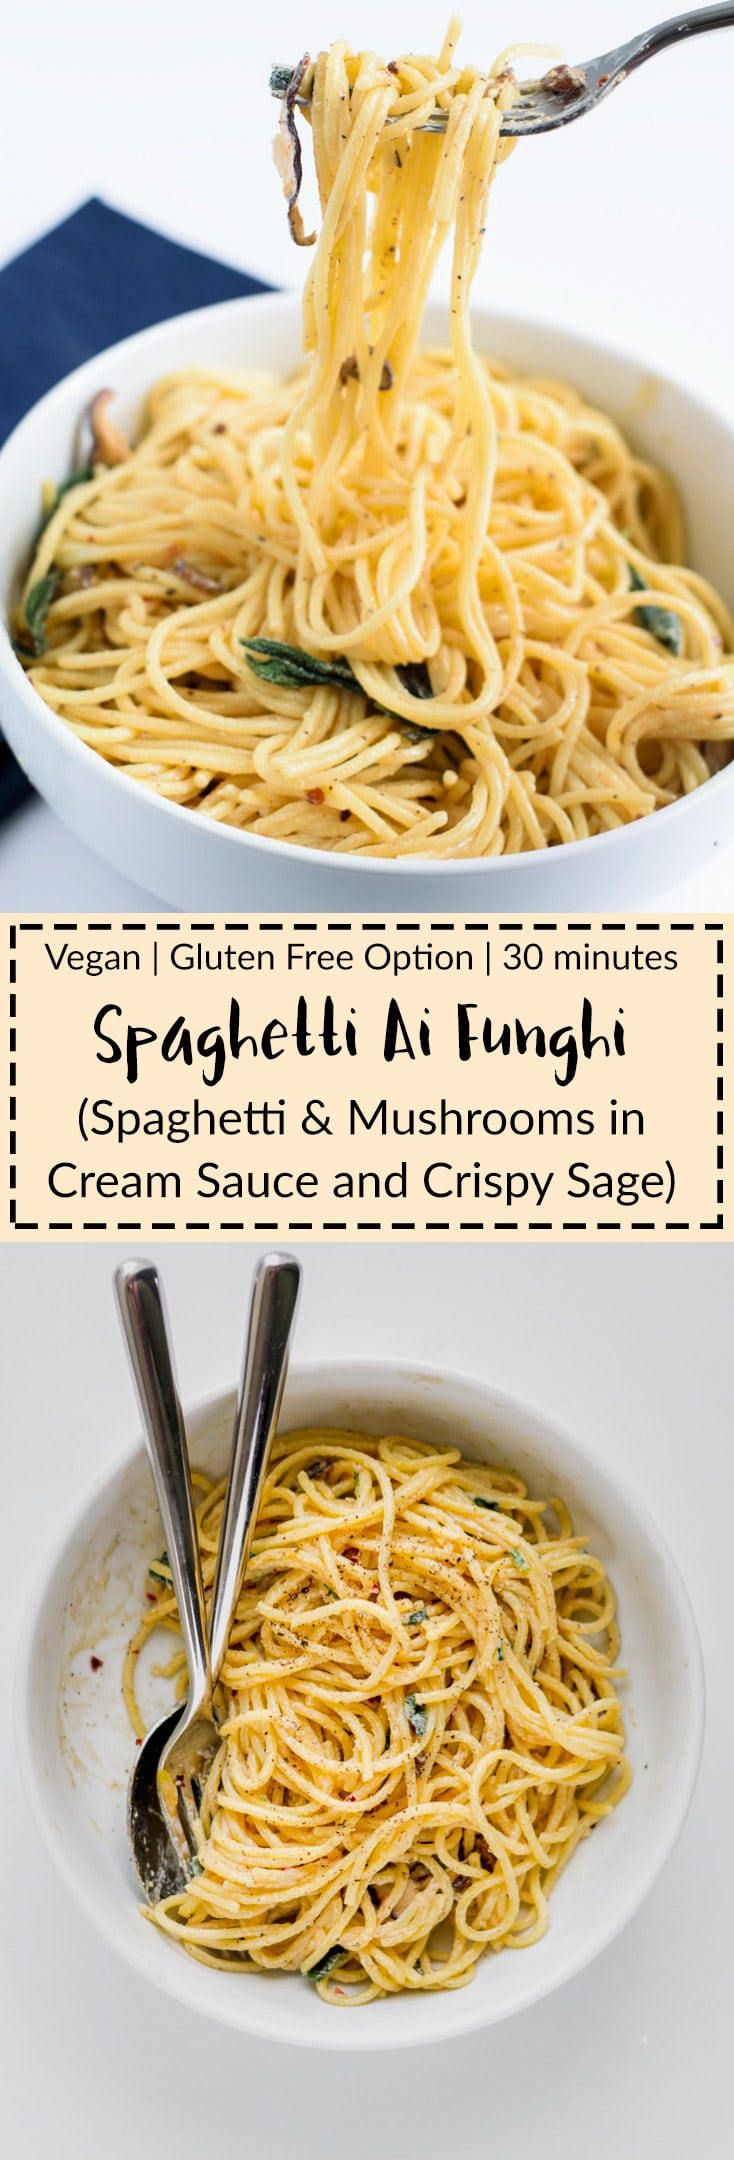 Spaghetti ai Funghi | Spaghetti is tossed in a light cream sauce with caramelized mushrooms, and served with crispy fried sage and lots of freshly ground black pepper. Vegan with a gluten free option. Ready in 30 minutes. | thecuriouschickpea.com #vegan #pasta